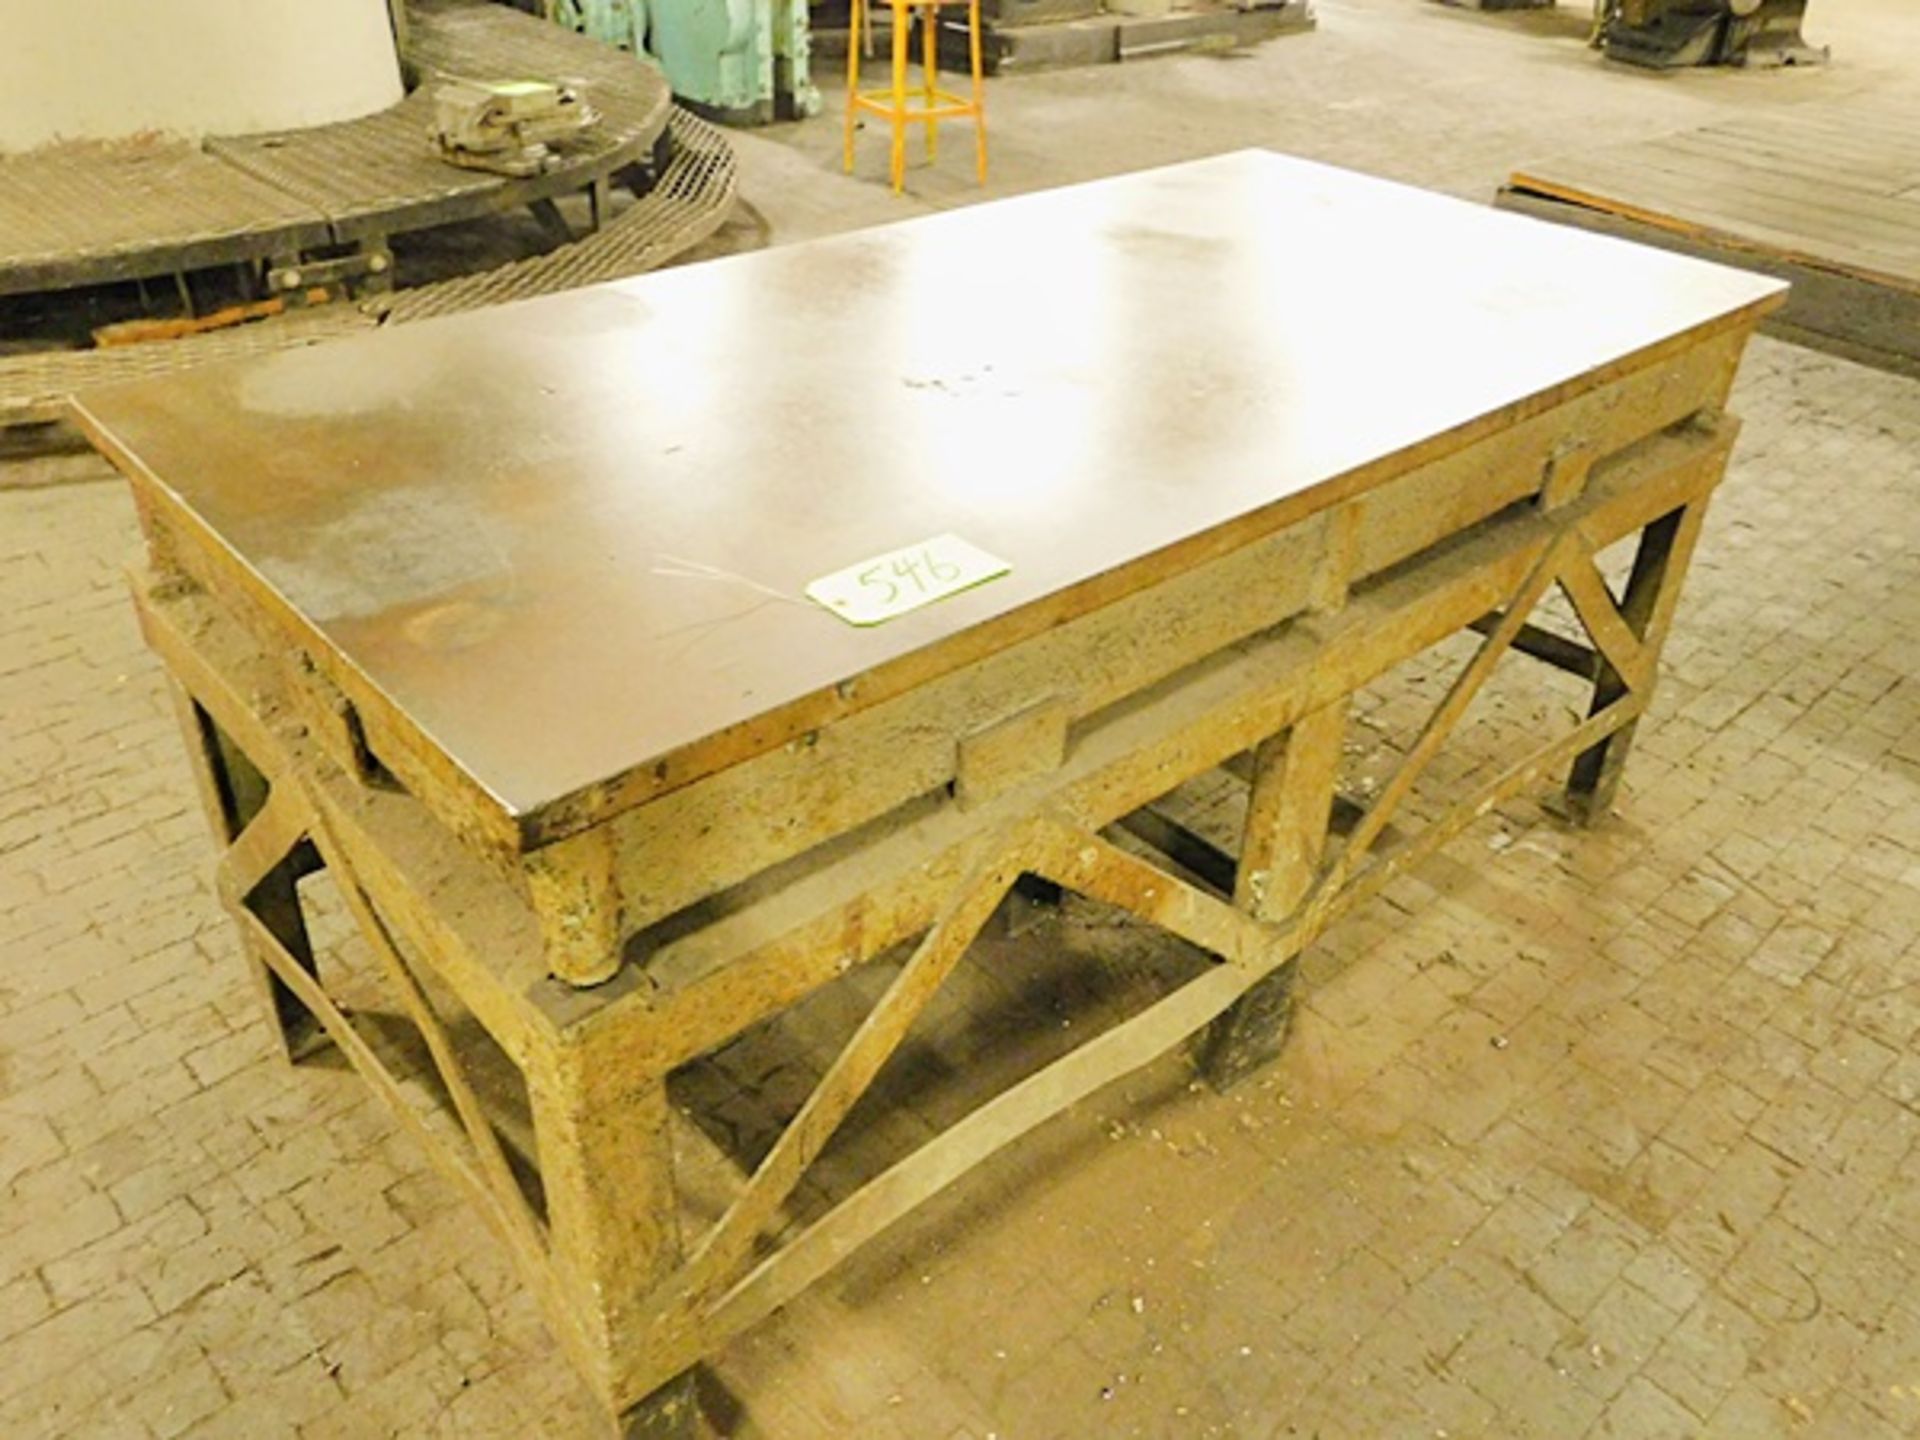 Steel Surface Plate with Workbench